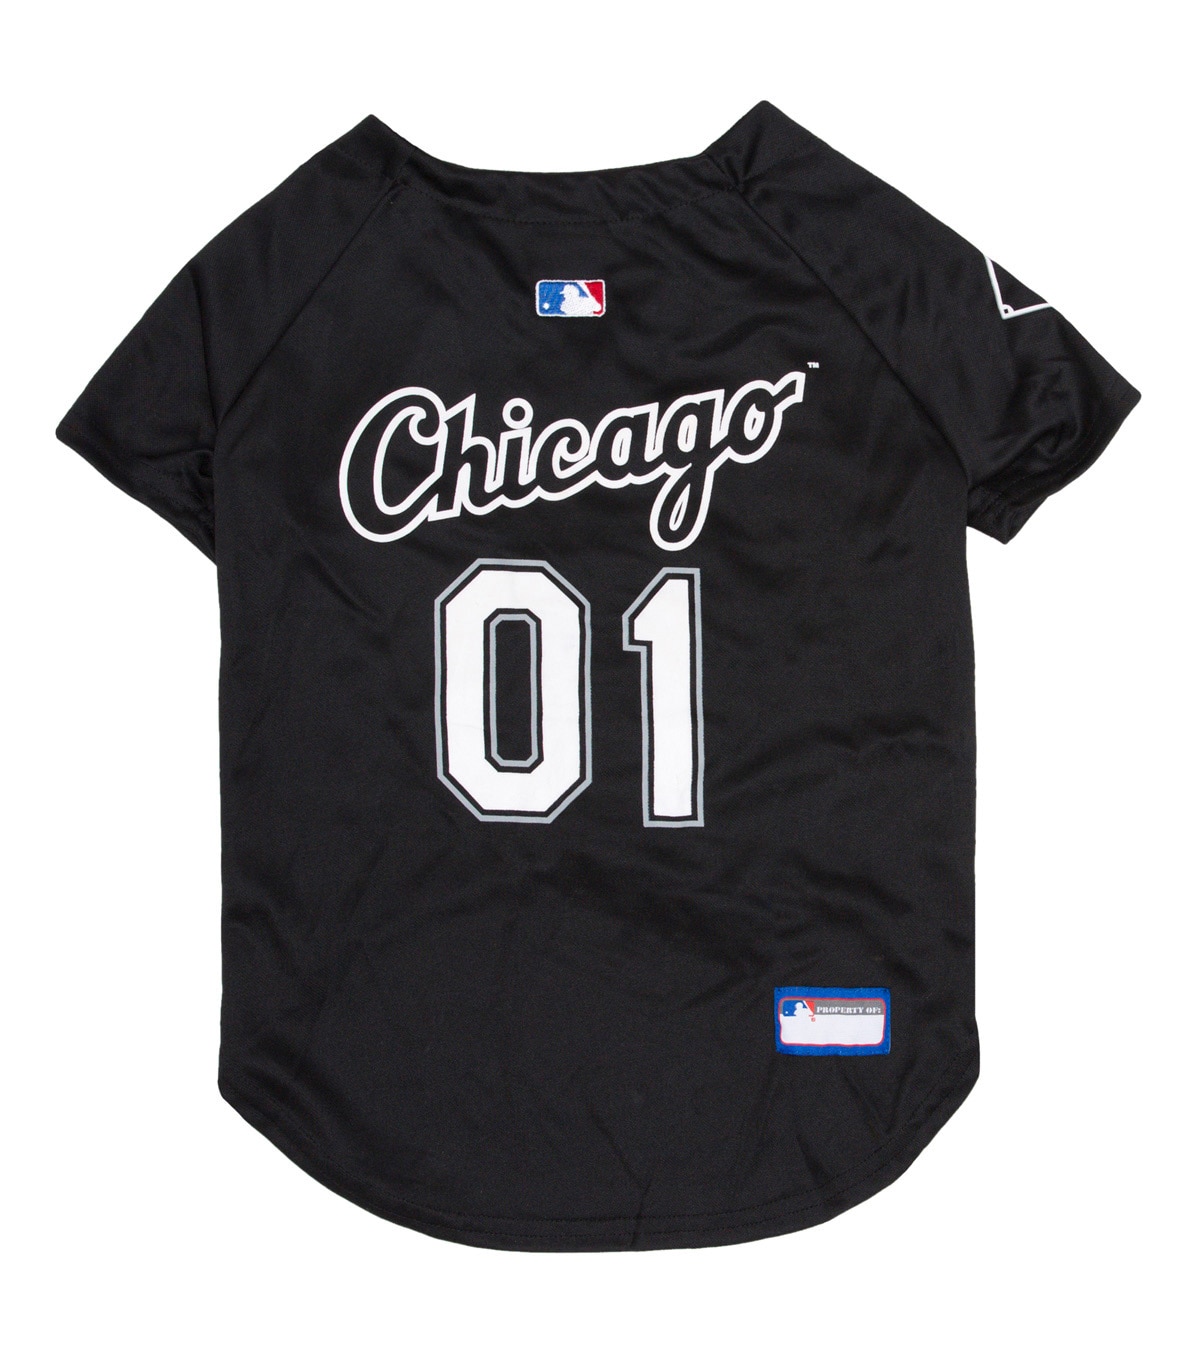 white sox button up jersey